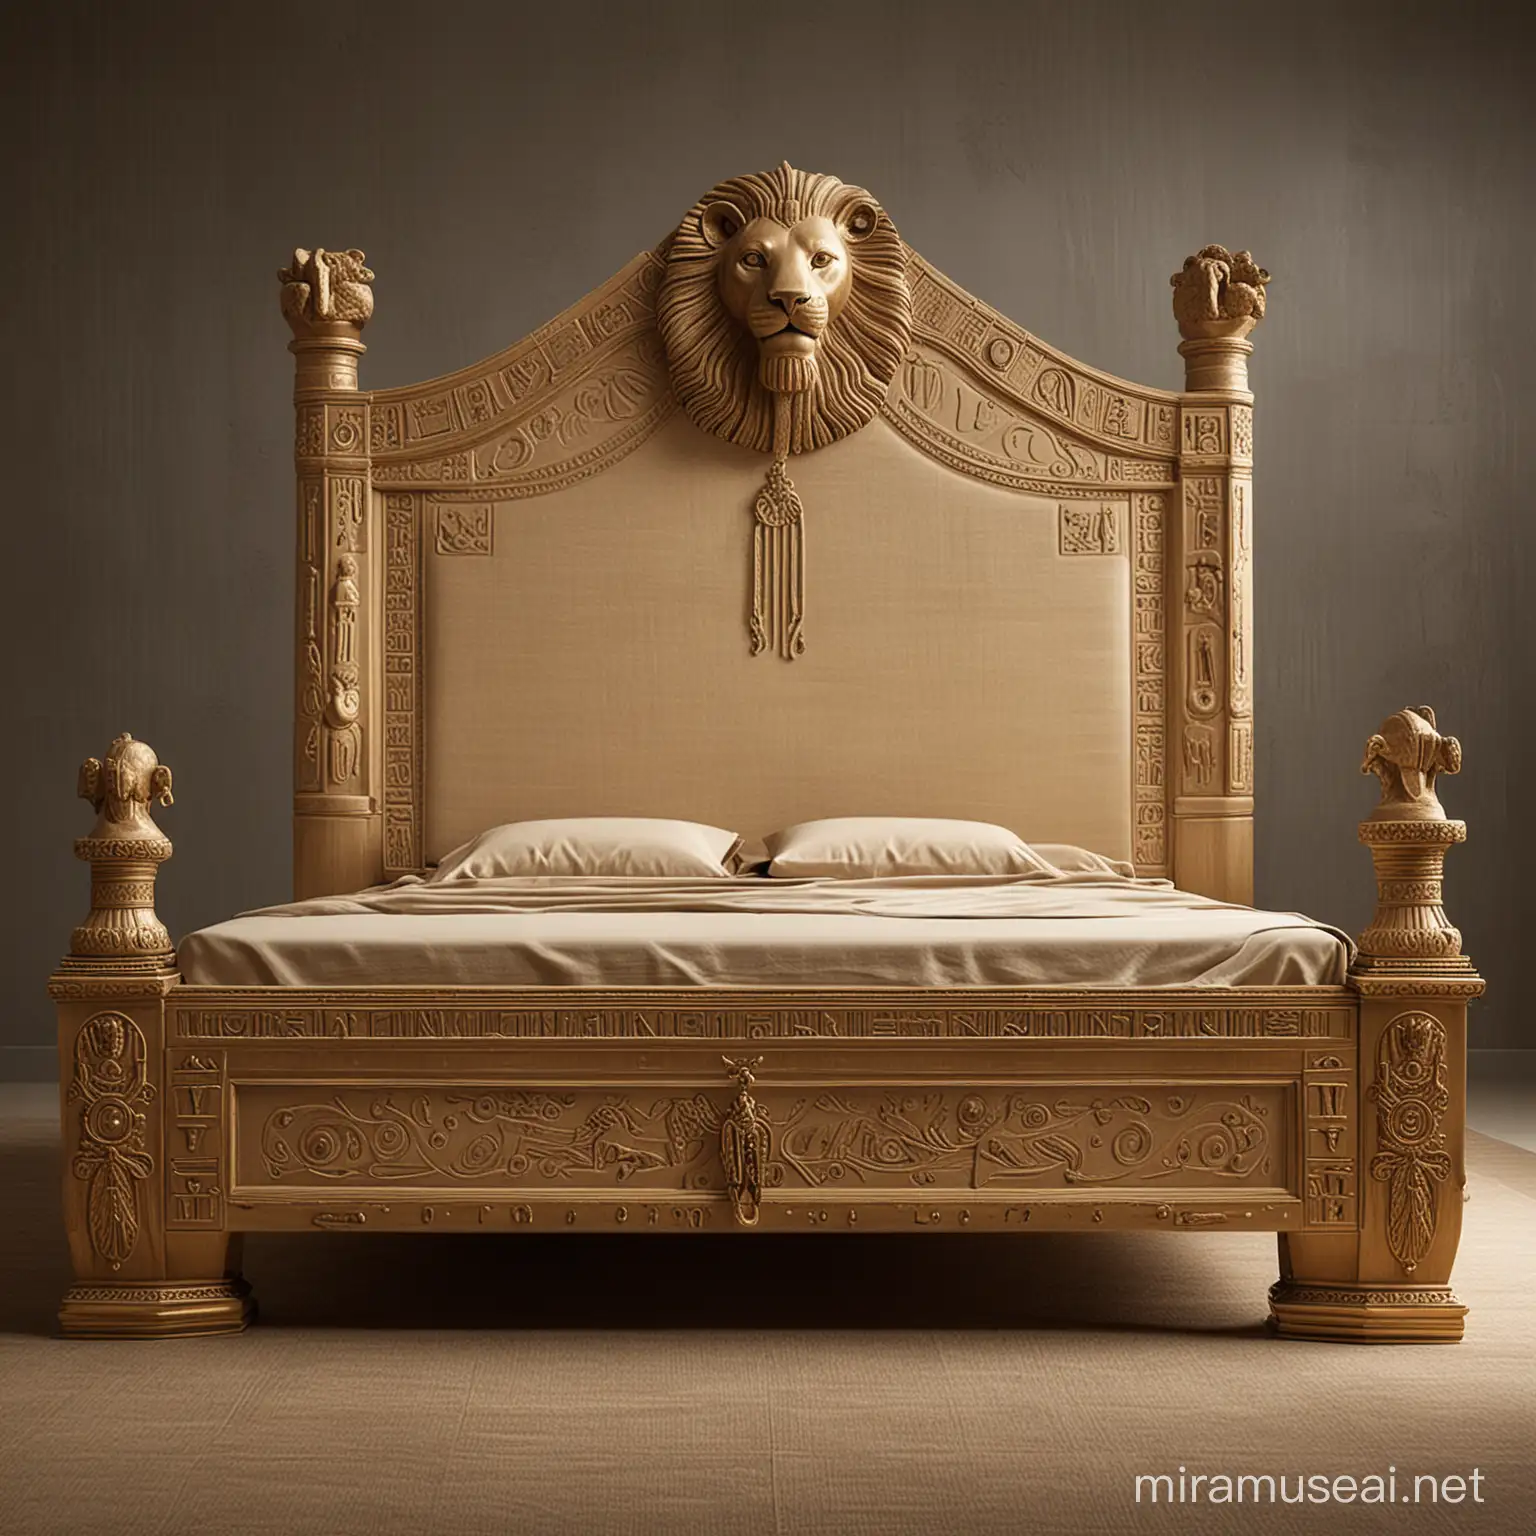 
A bed inspired by ancient Egyptian Pharaonic furniture. The back of the bed has royal decorations and the key to life, and its legs are in the shape of a lion’s head.